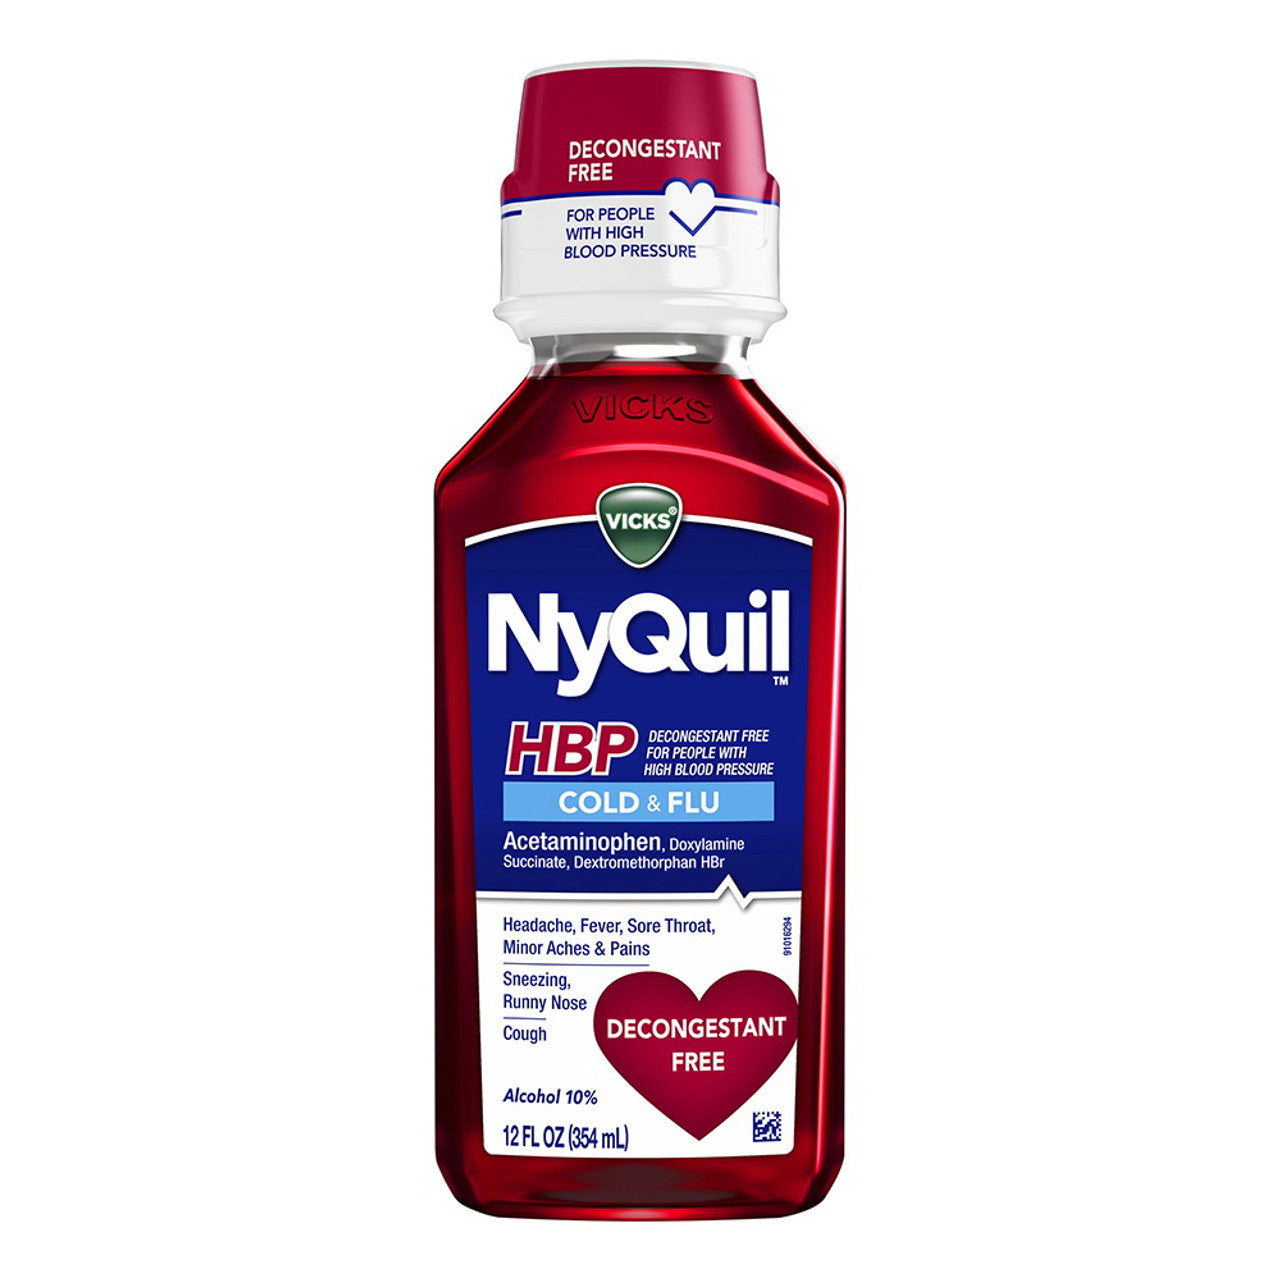 Vicks Nyquil High Blood Pressure Cold and Flu Medicine Liquid, 12 Oz